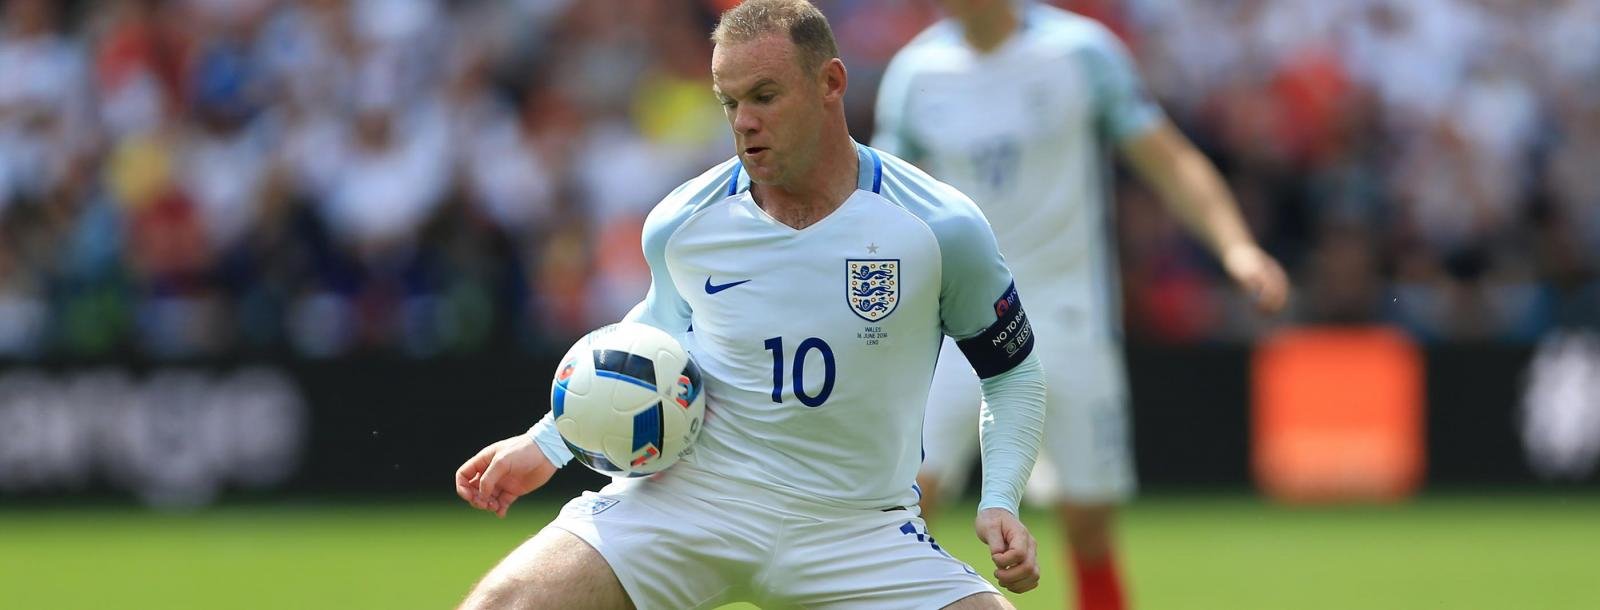 COMPETITION HAS ENDED: ‘Wayne Rooney: Captain of England’ book